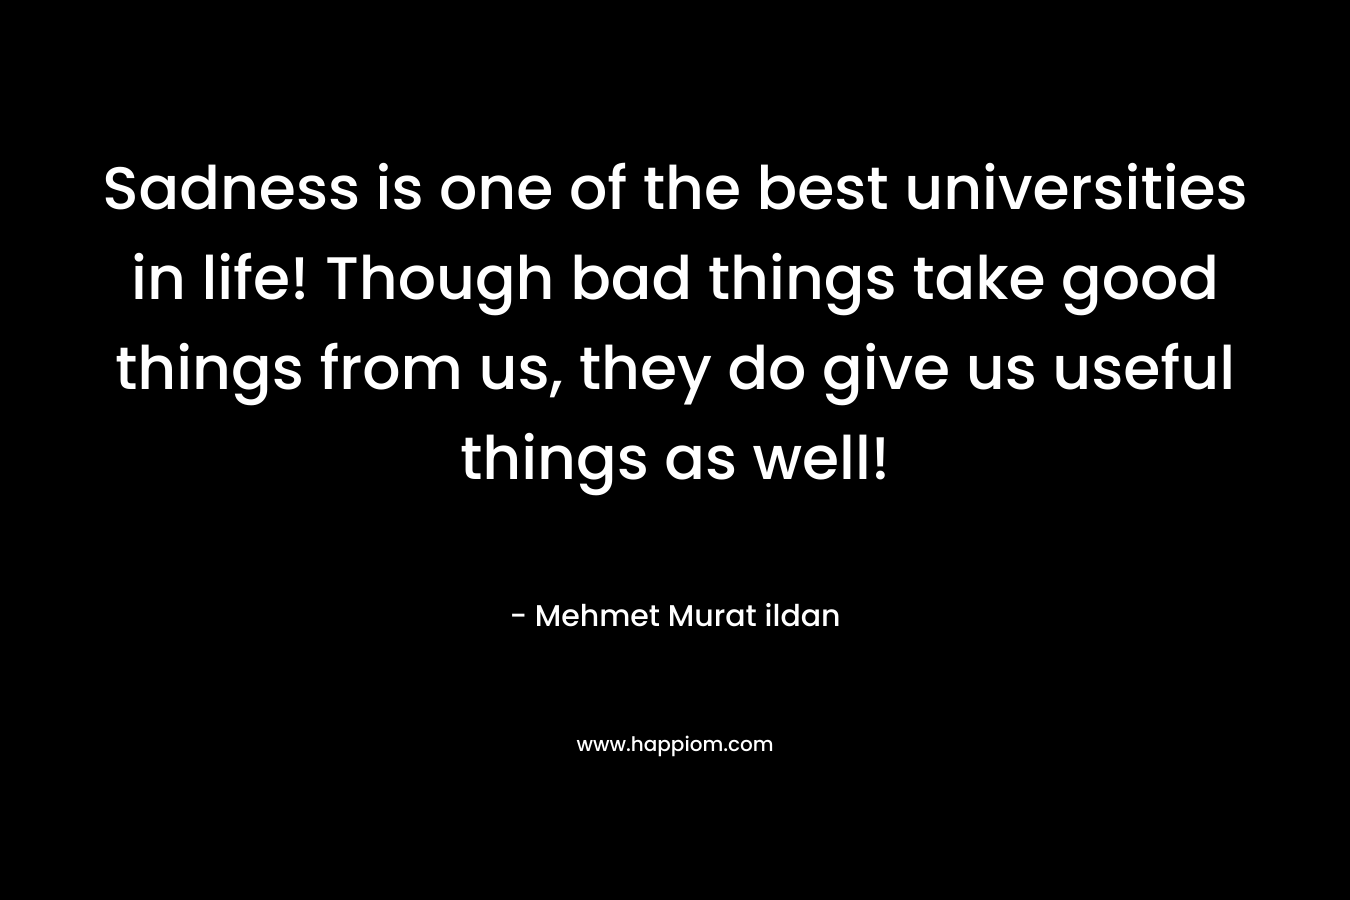 Sadness is one of the best universities in life! Though bad things take good things from us, they do give us useful things as well! – Mehmet Murat ildan